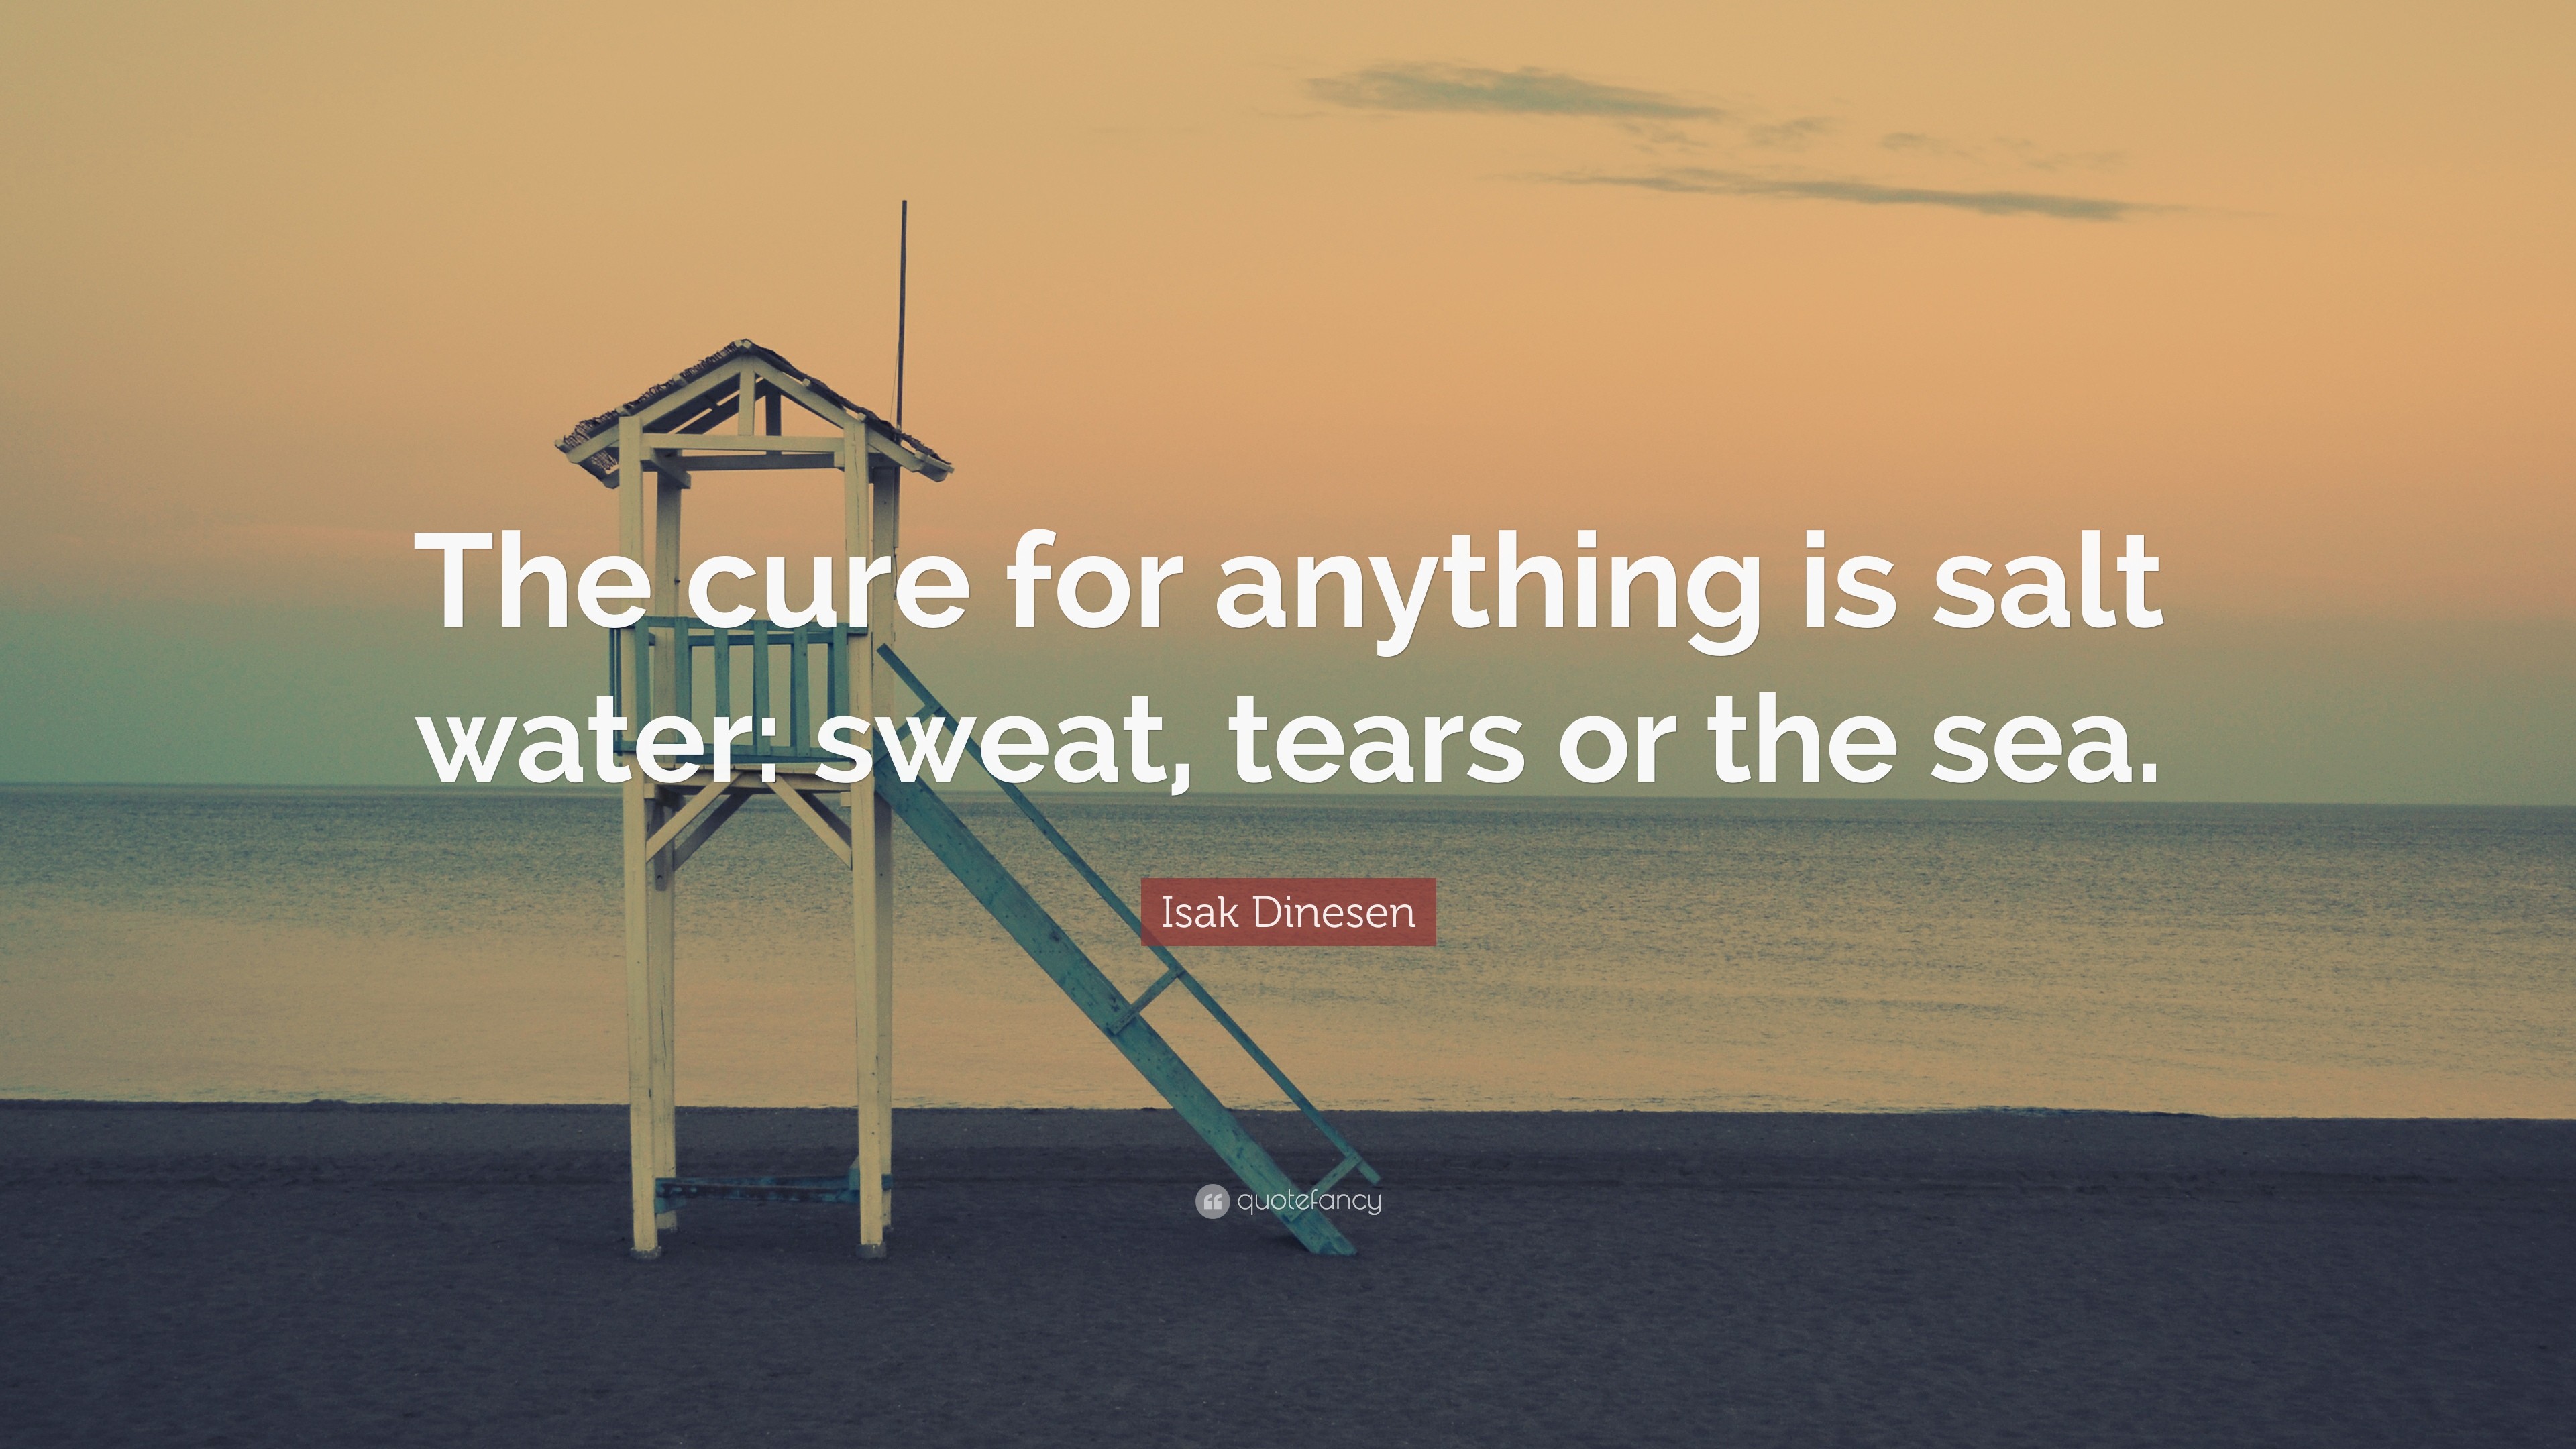 3840x2160 Isak Dinesen Quote: “The cure for anything is salt water: sweat, tears